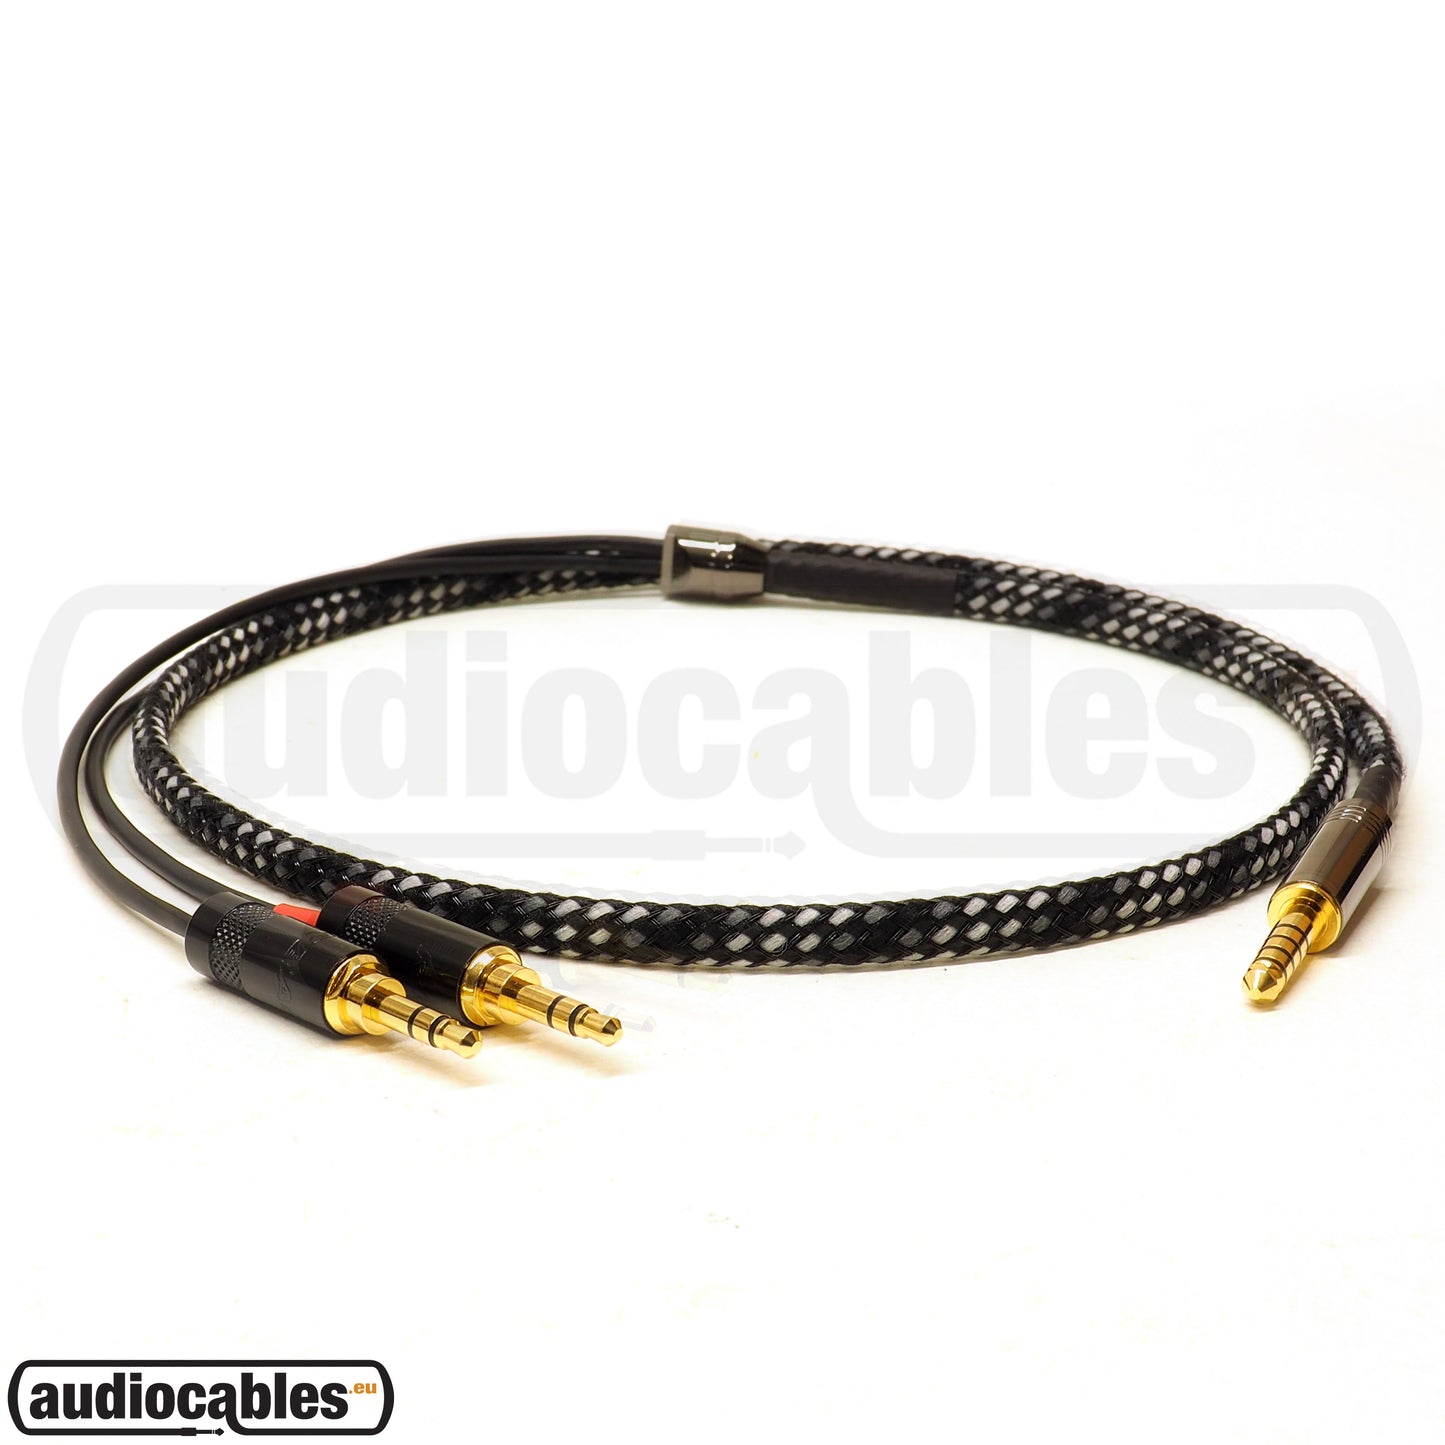 Mogami Balanced Cable for Hifiman Headphones (TRRRS, XLR & TRRS to dual 3.5mm)